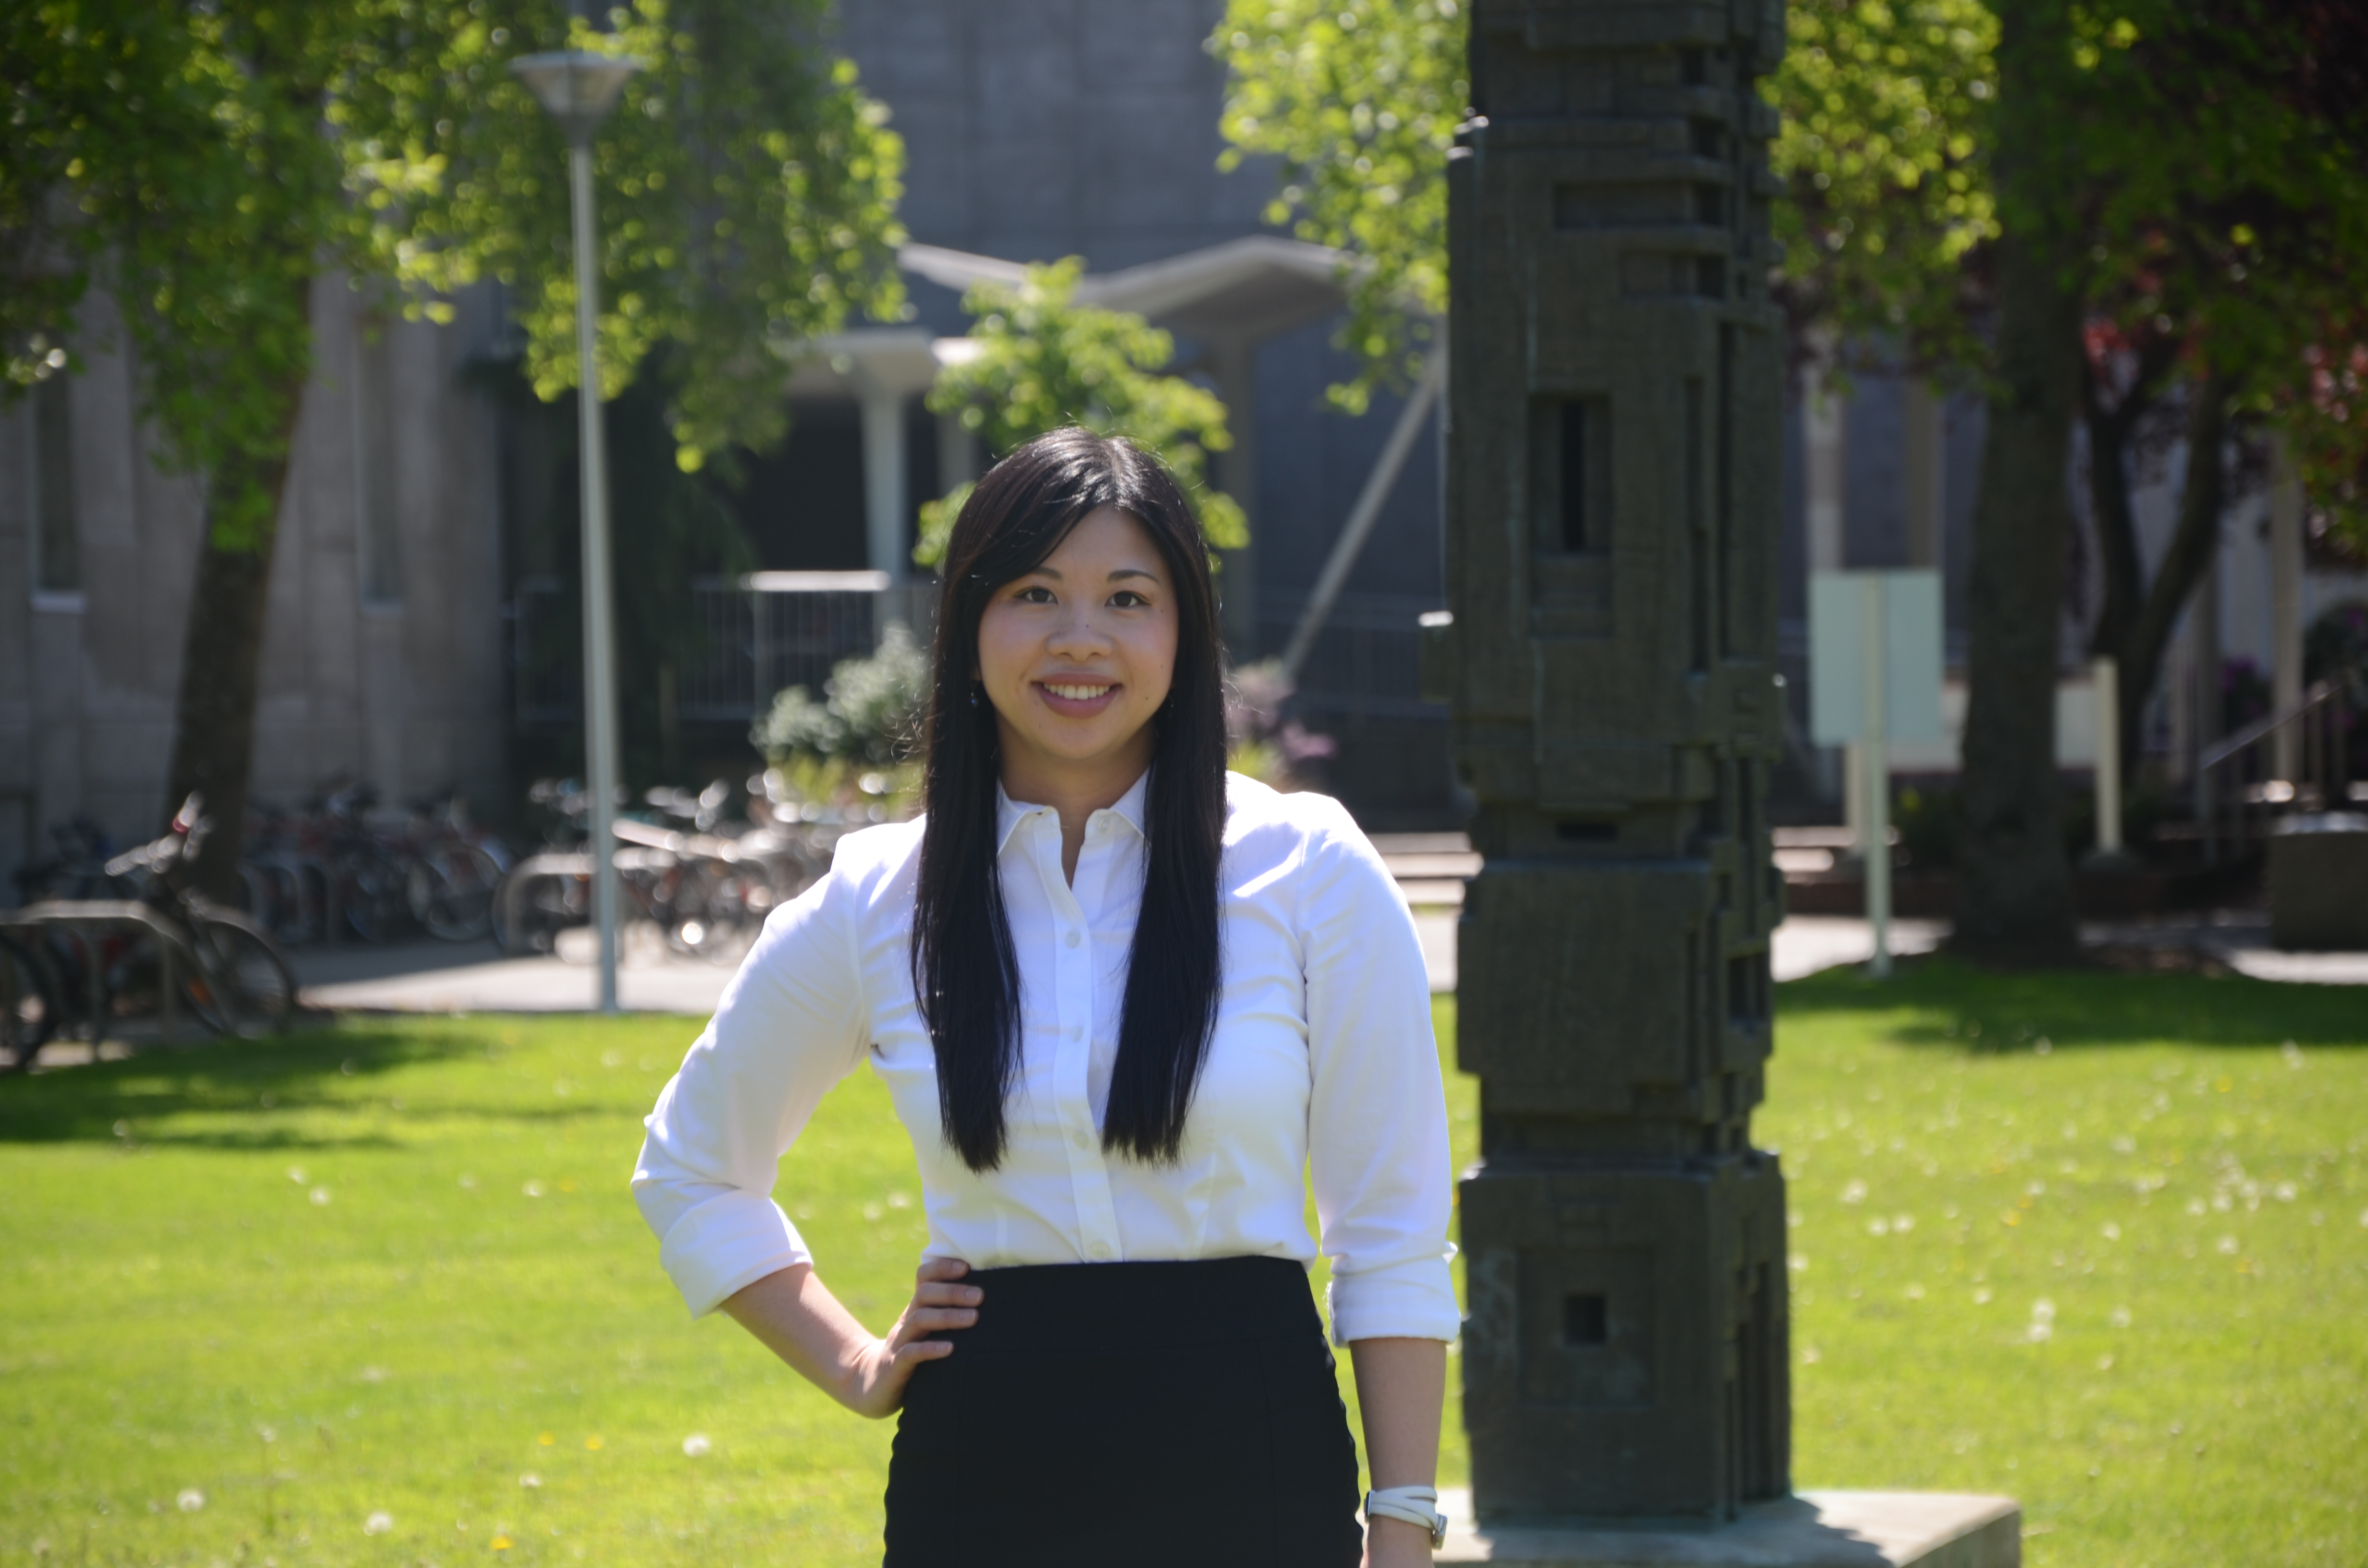 Health Sciences Alumni receives Fulbright Canada Scholarship to study health systems and services